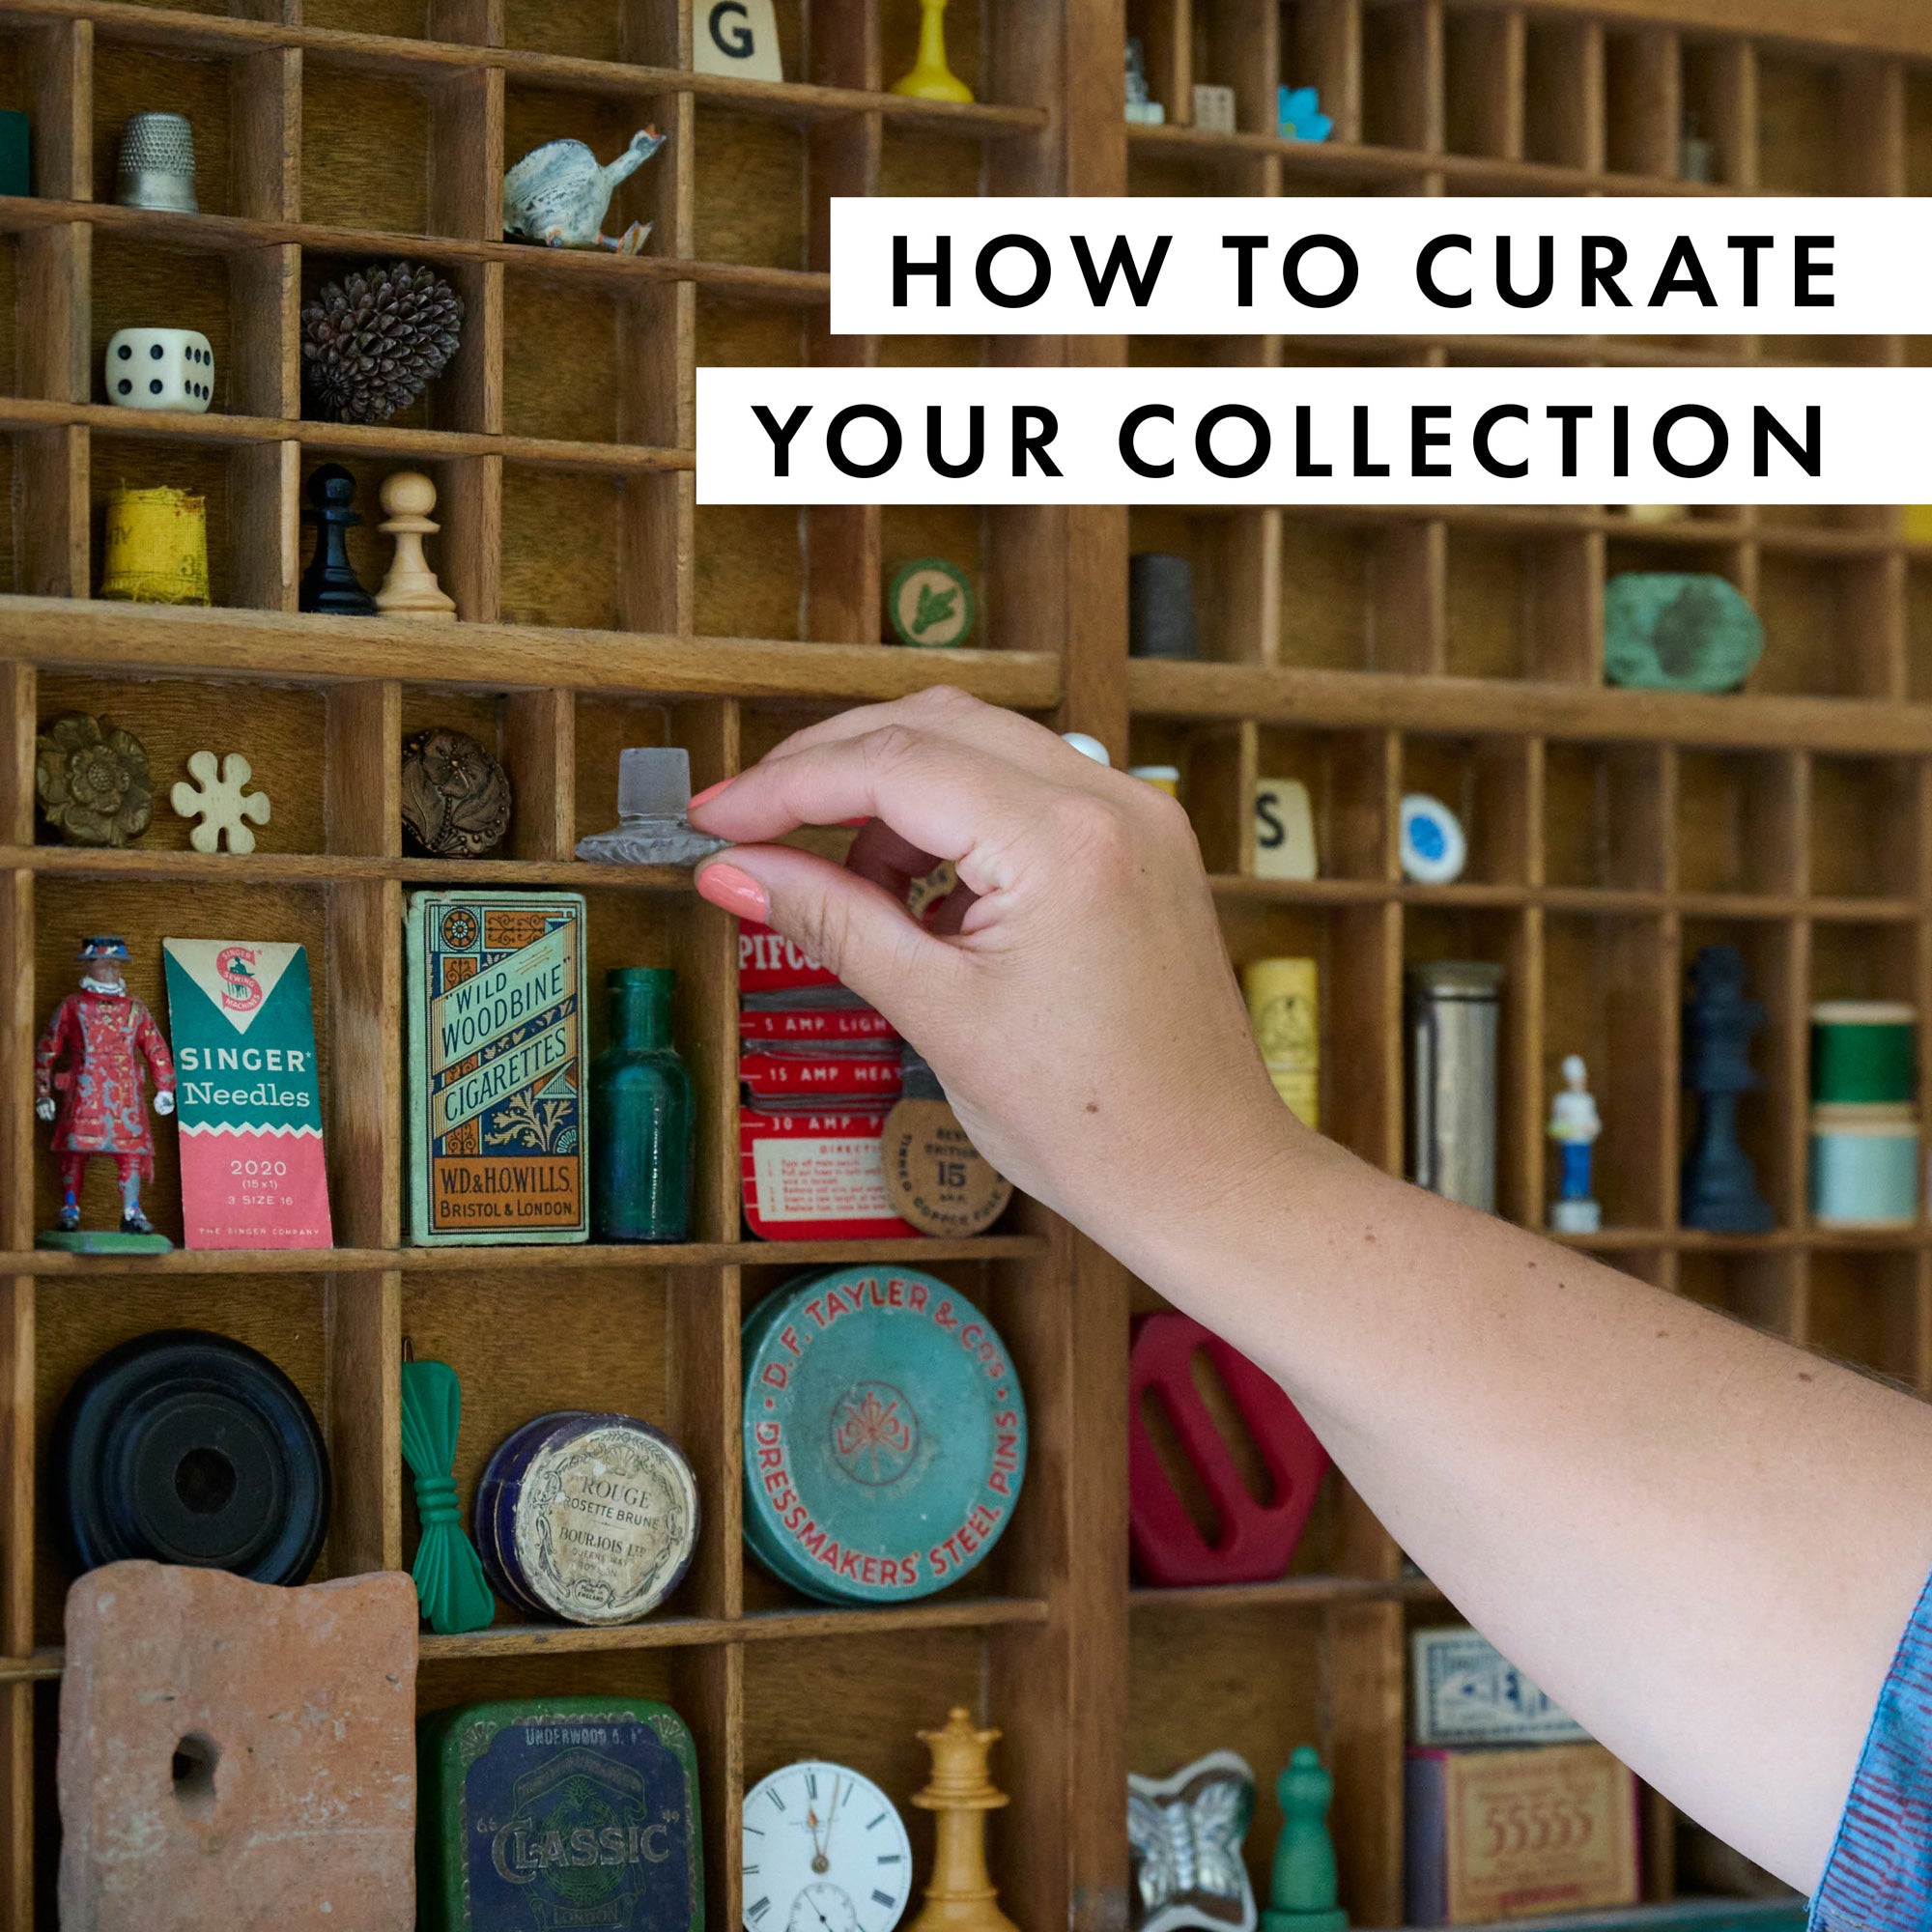 How to curate your collection ready for a commission or workshop